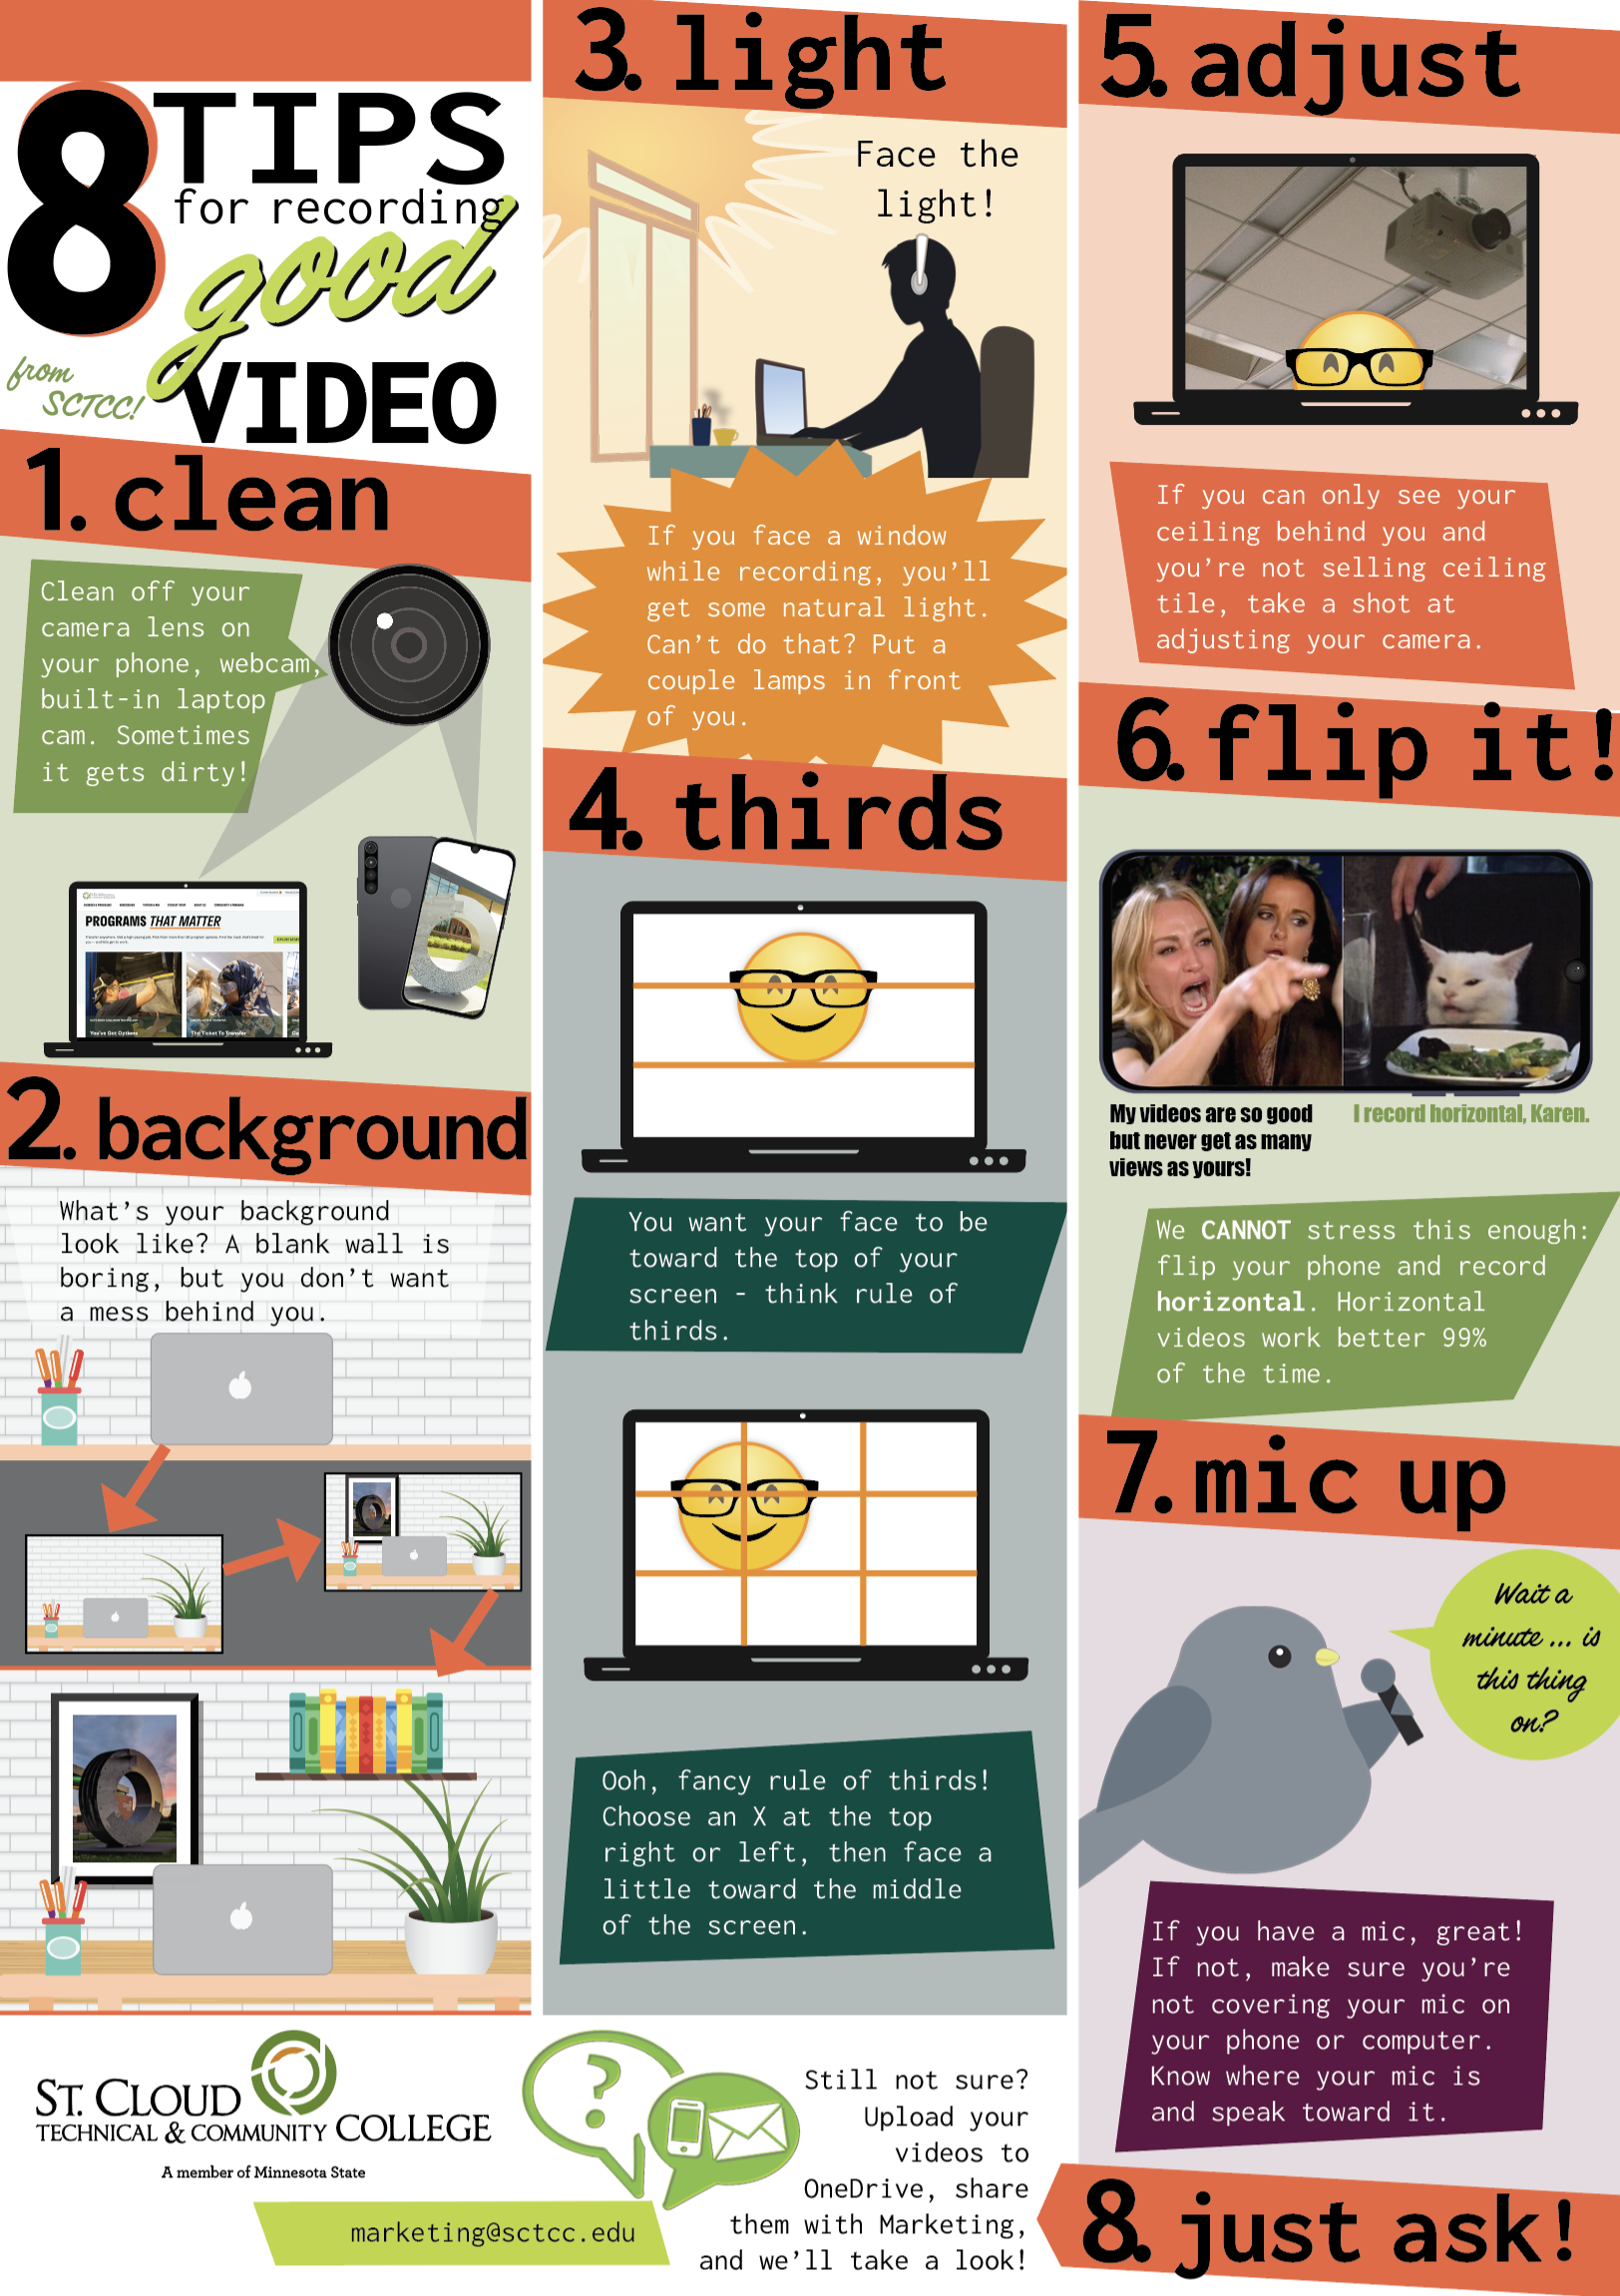 decorative explanation of video tips, text below